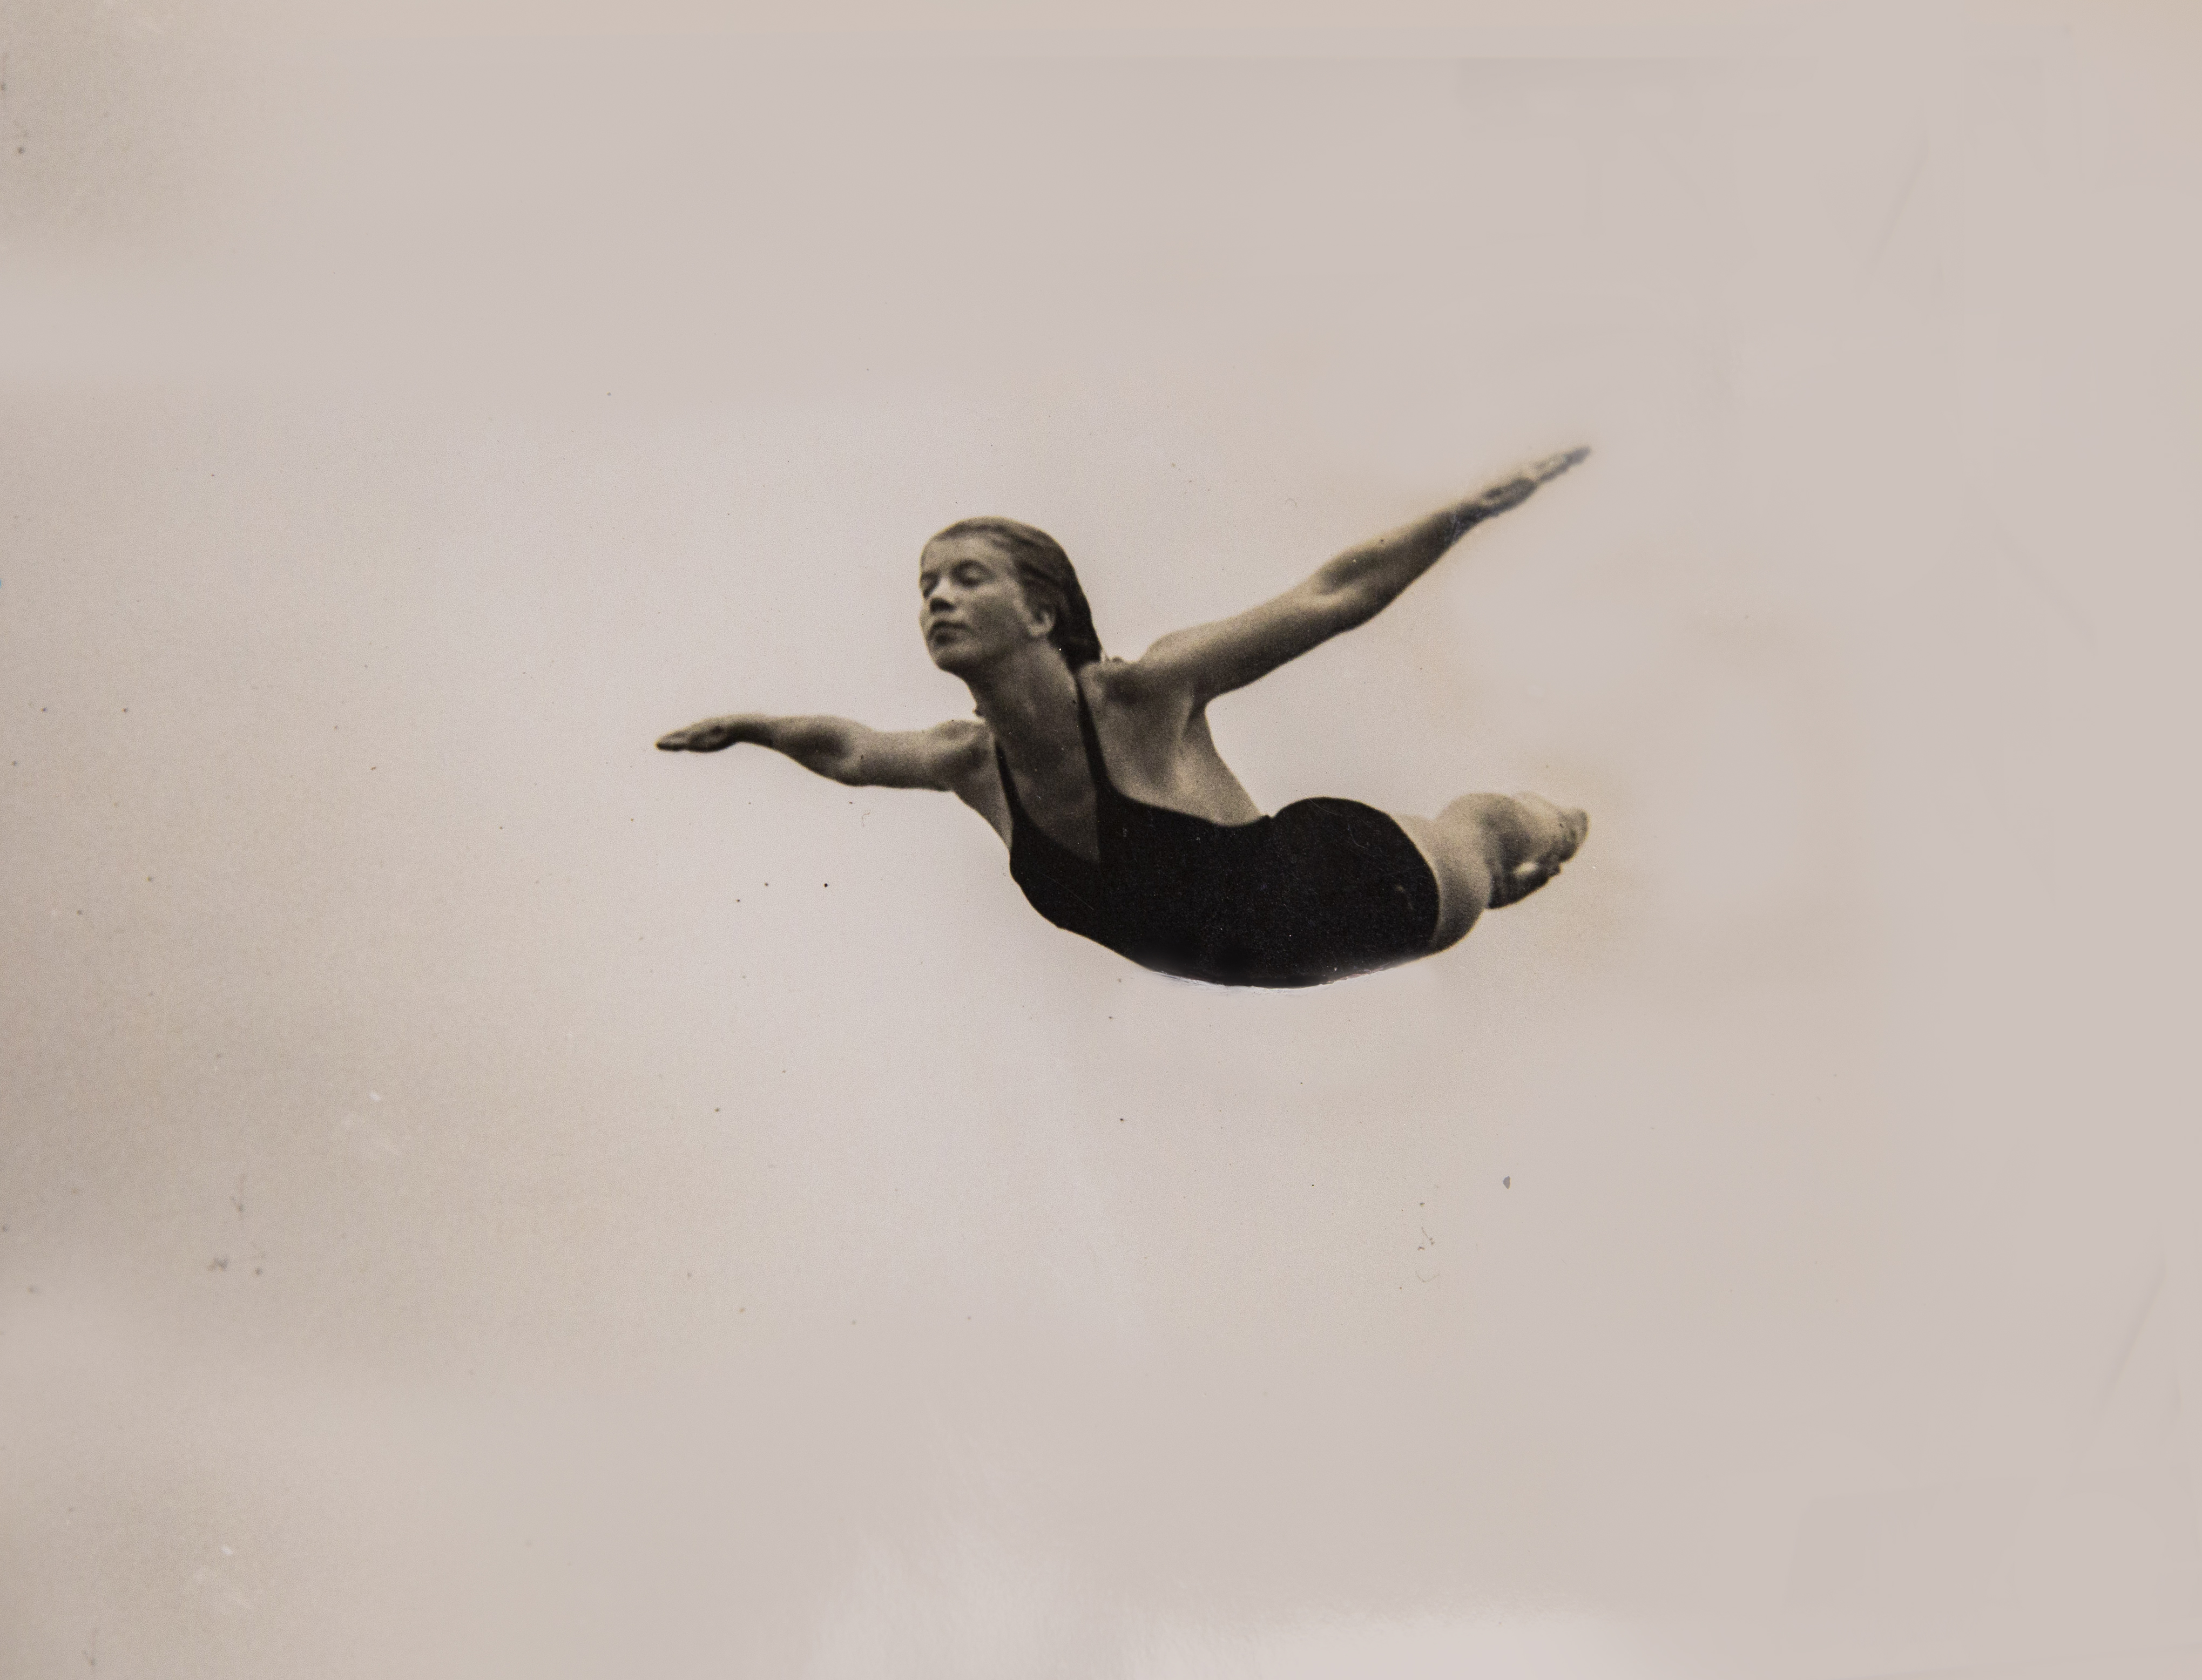 An old photo of a young woman diving through the air into a pool